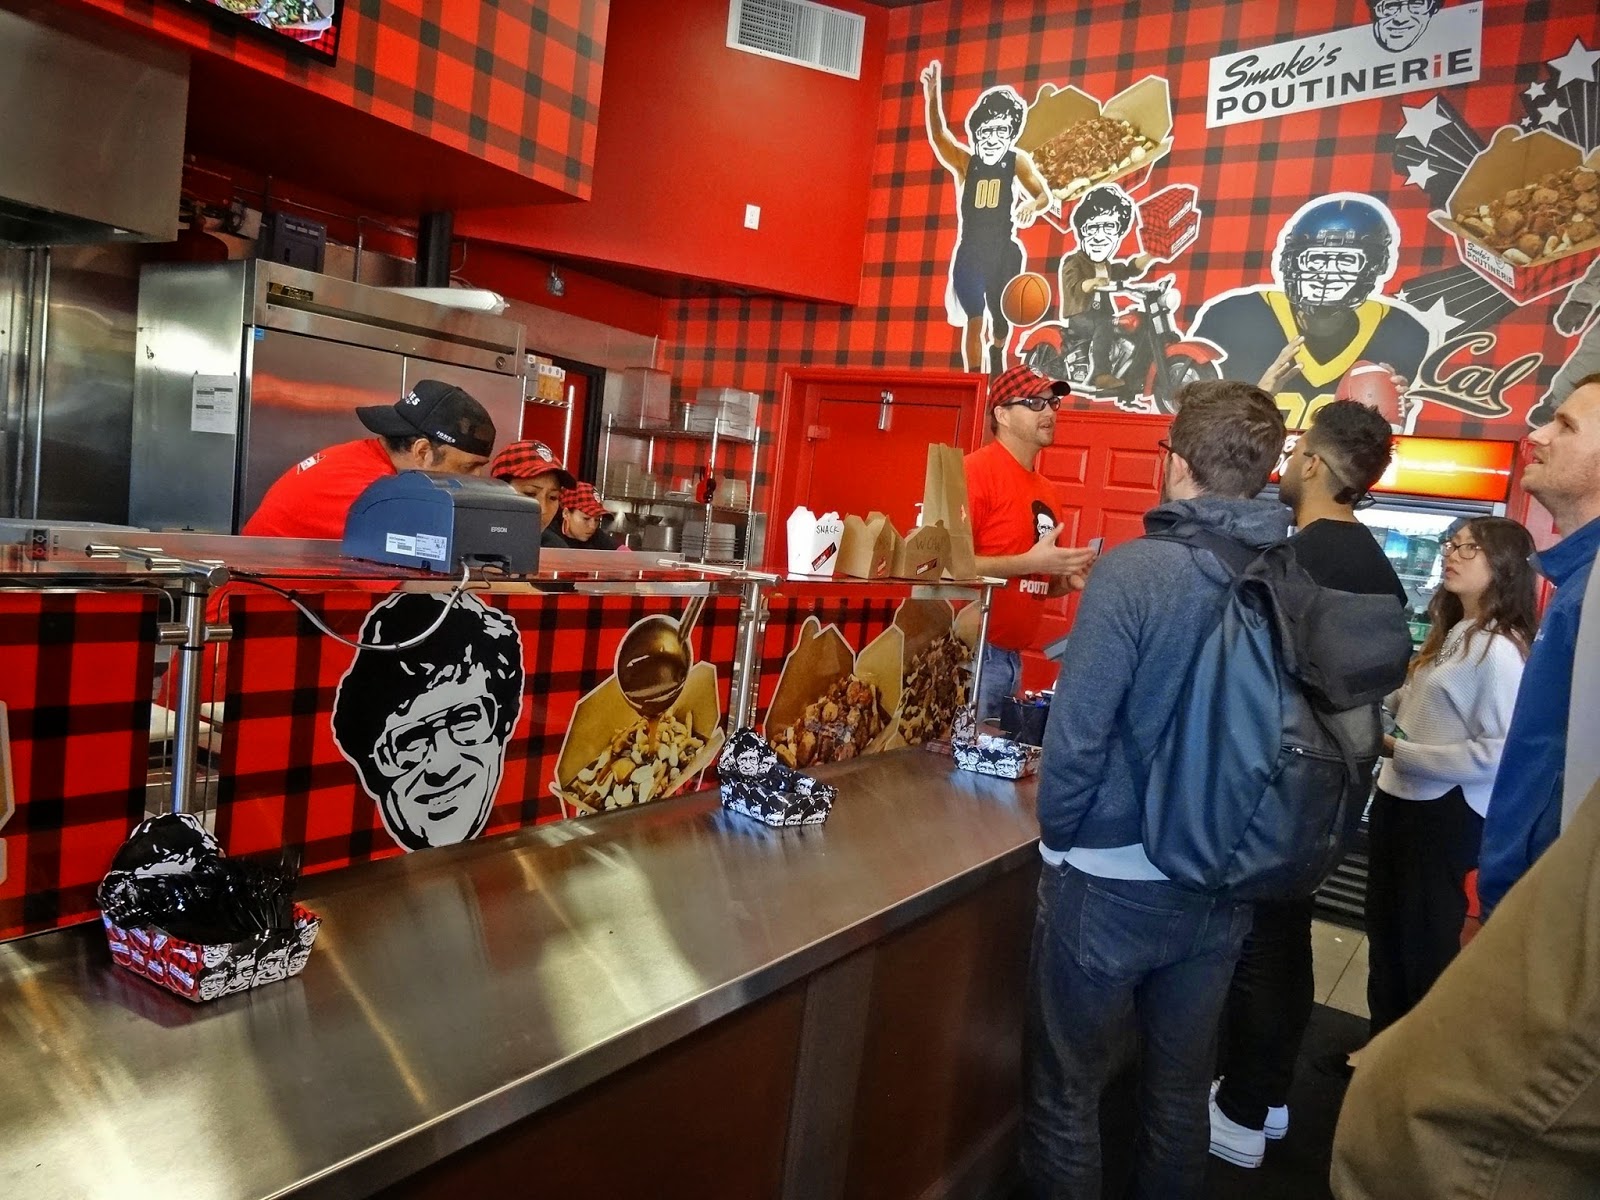 smokes poutinerie is located one block off of telegraph and